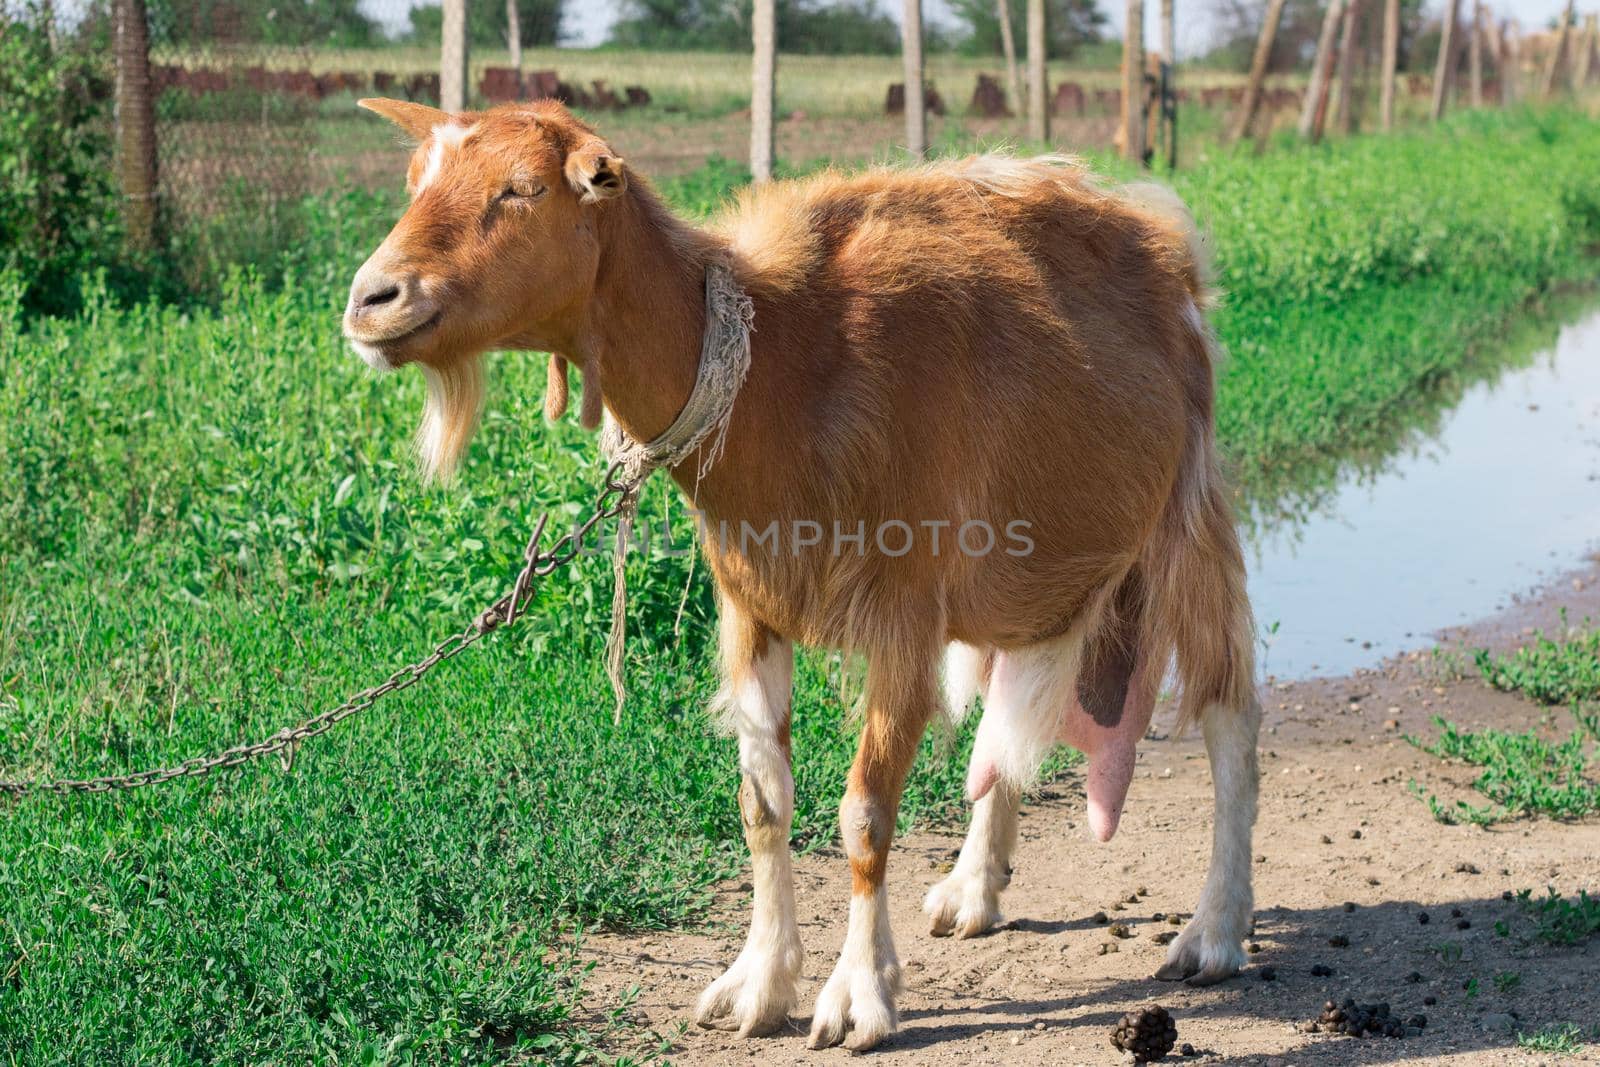 Domestic red goat standing on road in countryside pasture land feeding on grass